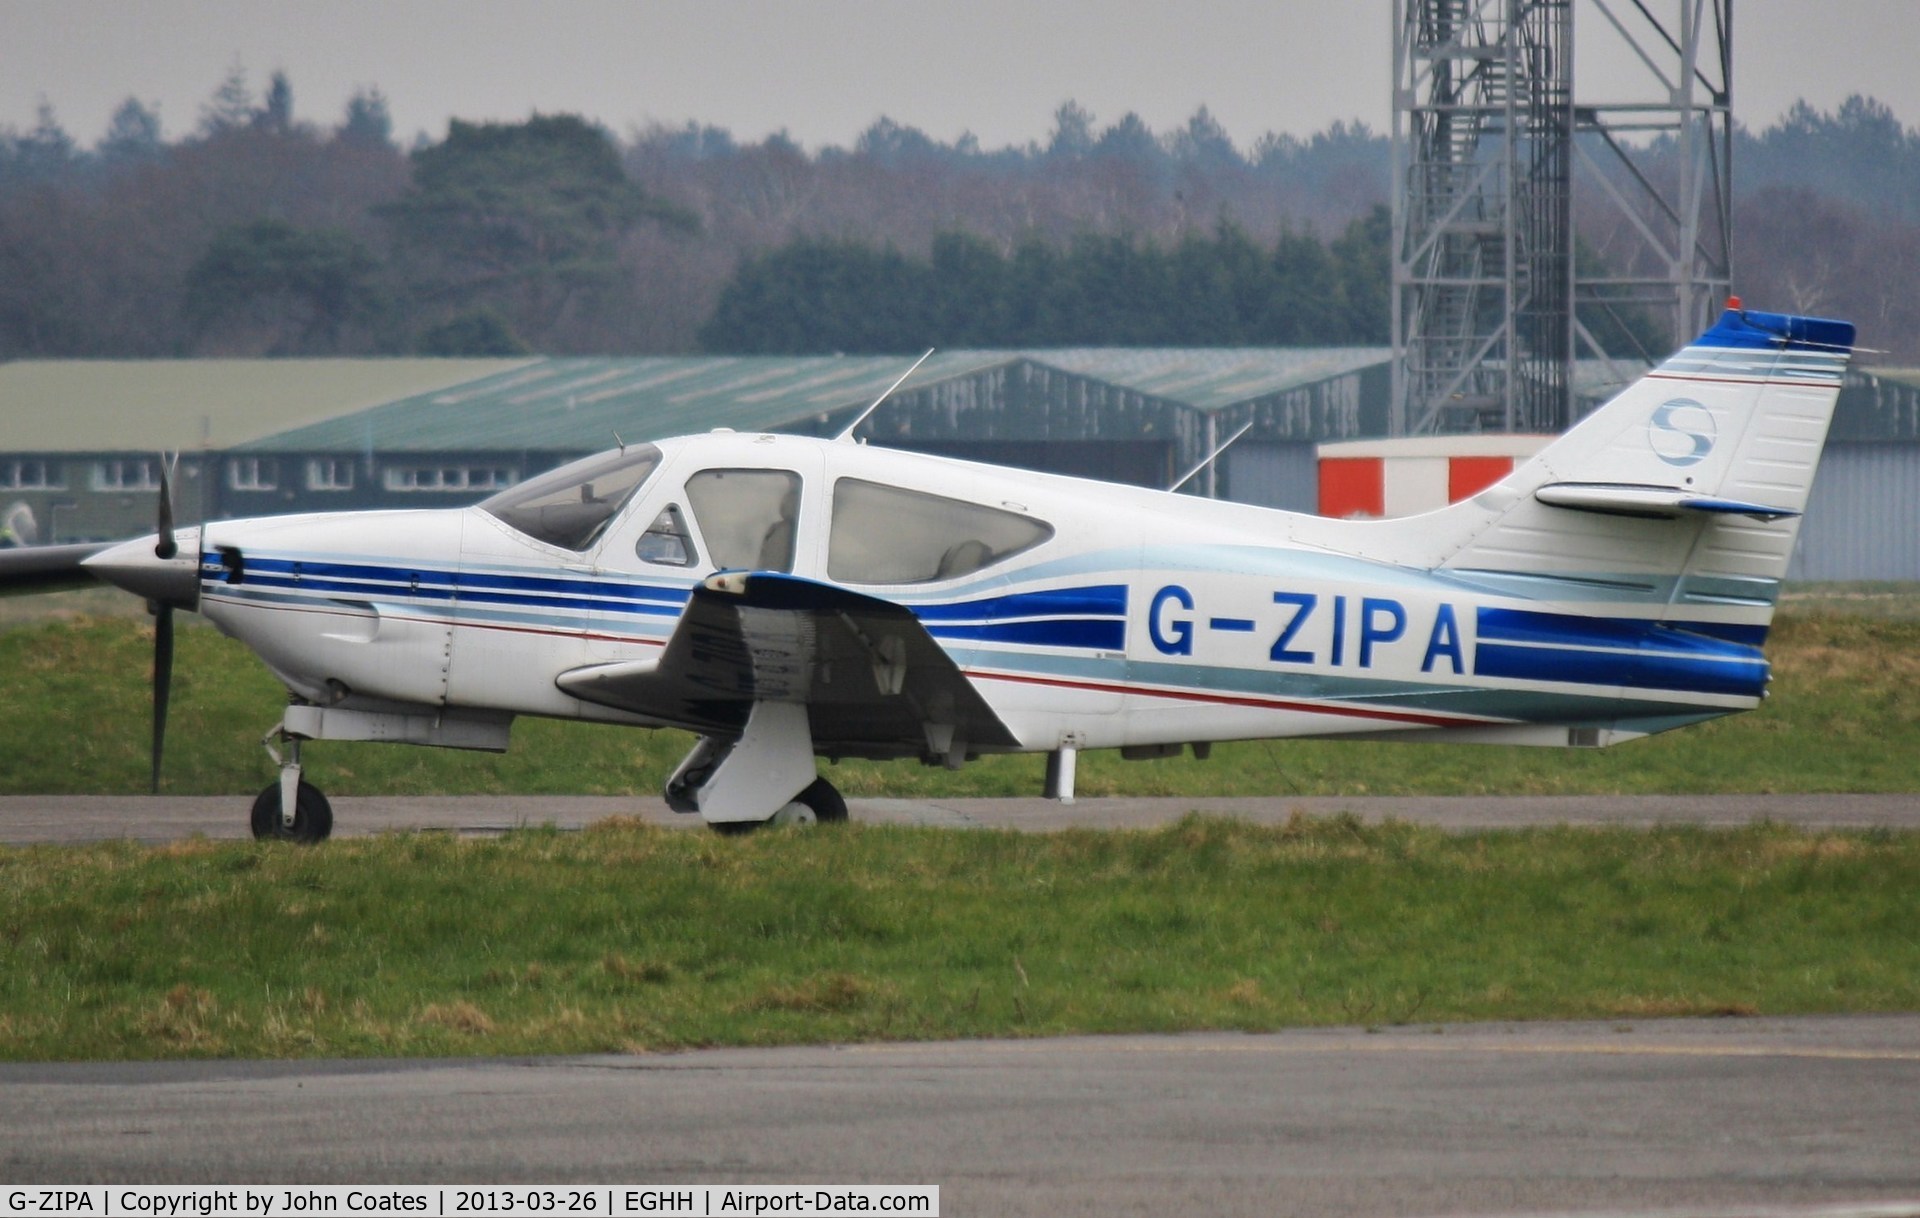 G-ZIPA, 1979 Rockwell Commander 114A C/N 14505, Visitor on a misty day